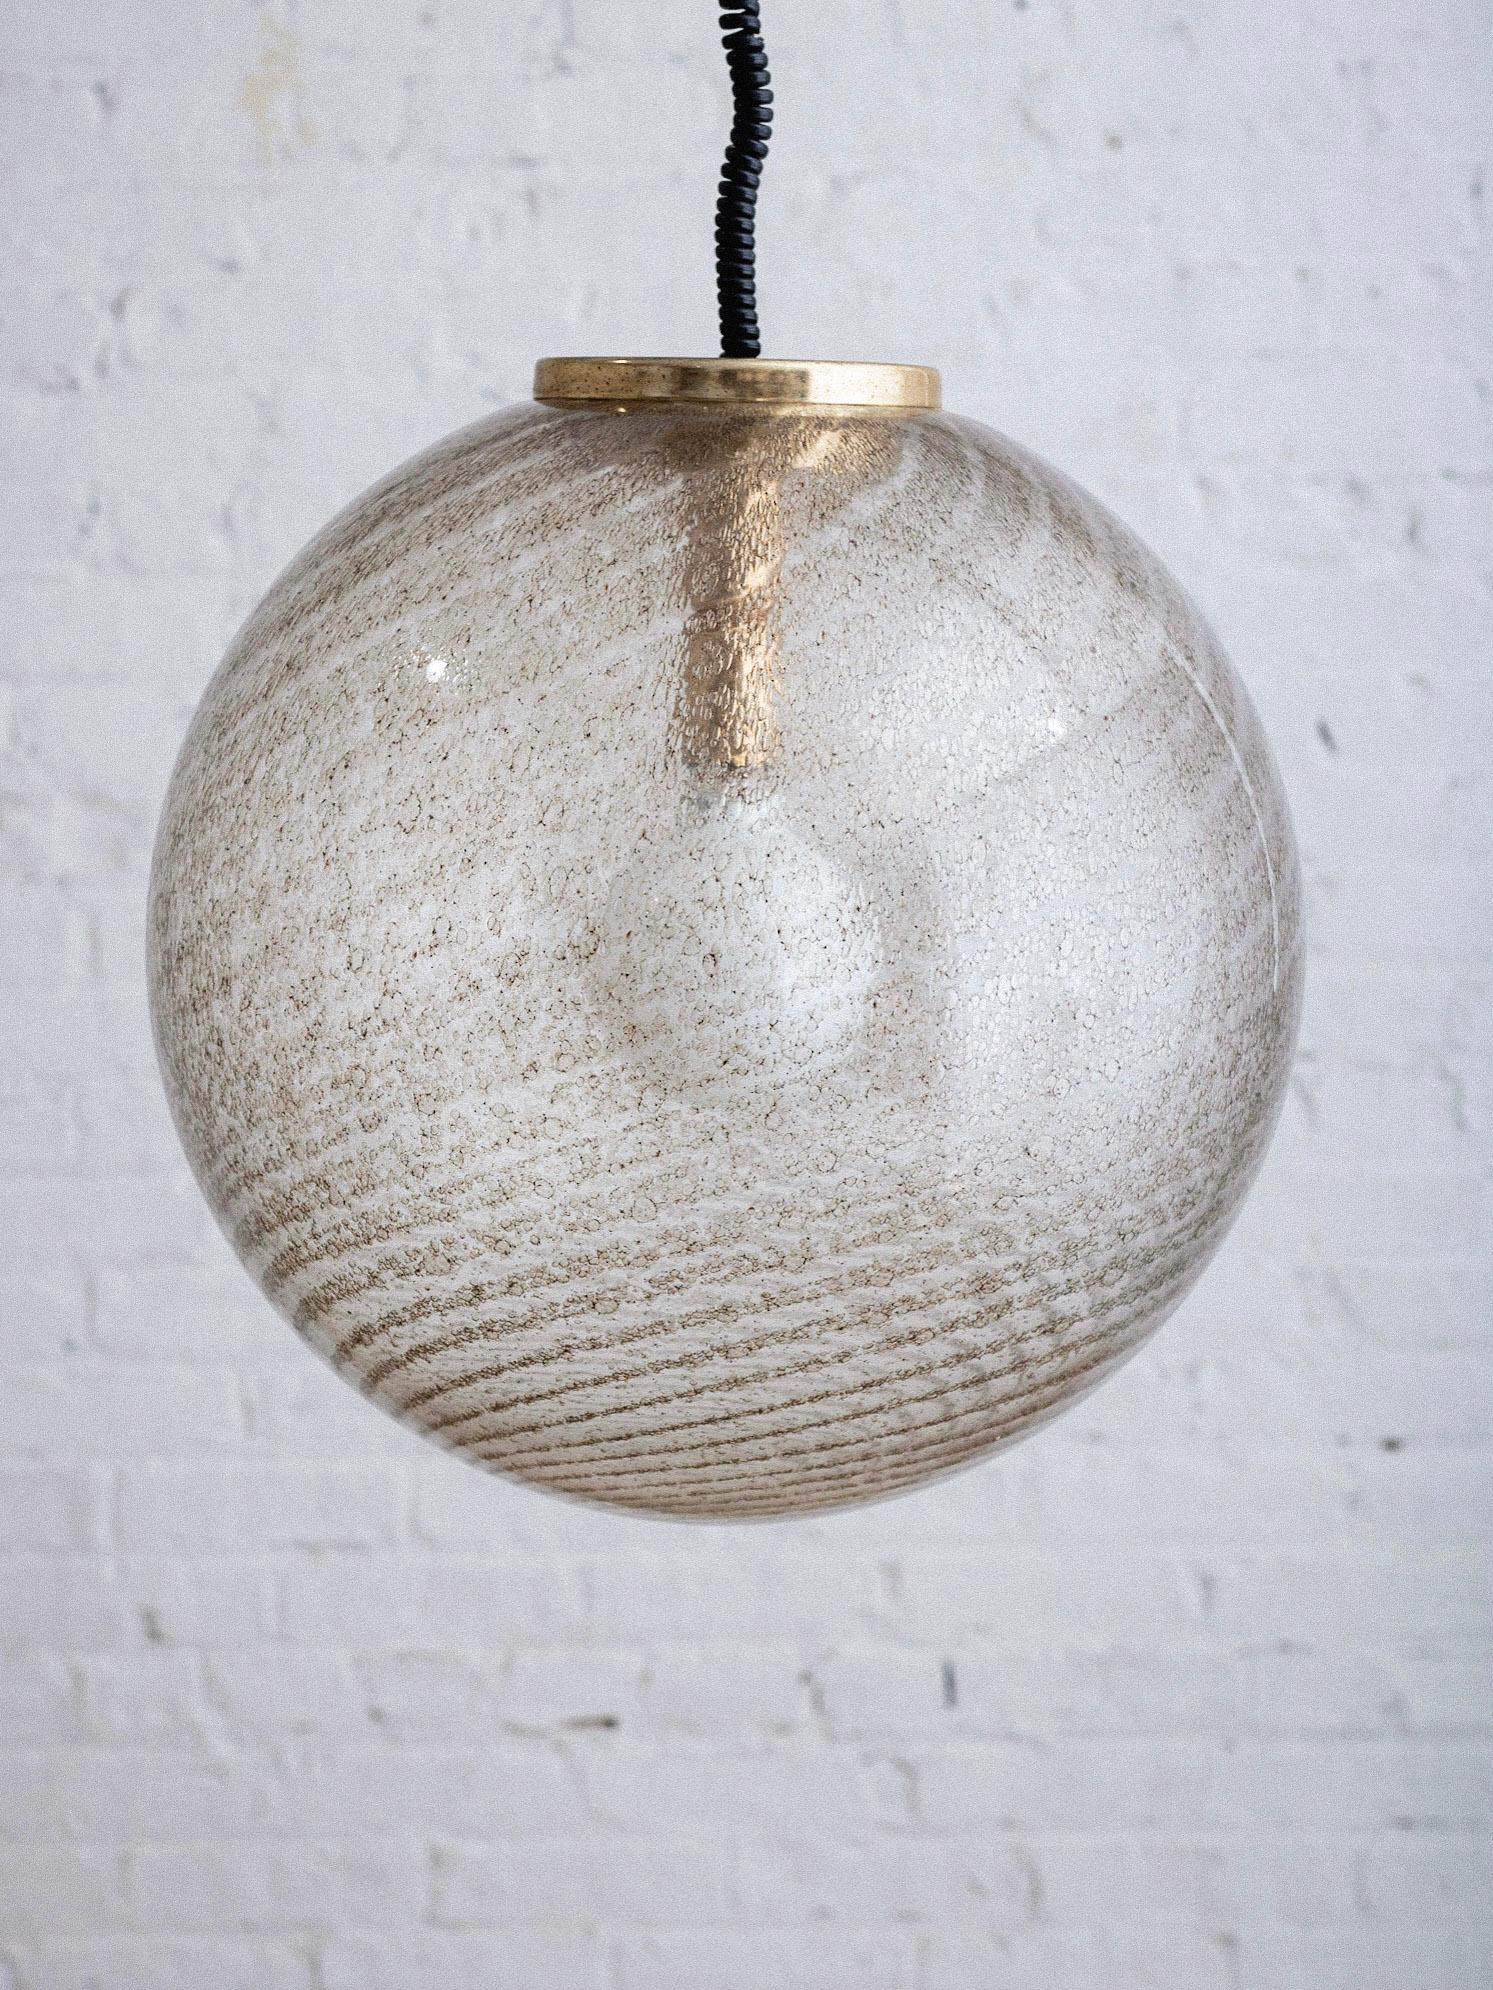 A mid century Murano glass pendant light. Speckled gold swirl shimmers through the clear glass. Brass hardware and black spiral cord. Original ceiling canopy included. Wire adds 26” to height. Sourced in Northern Italy.